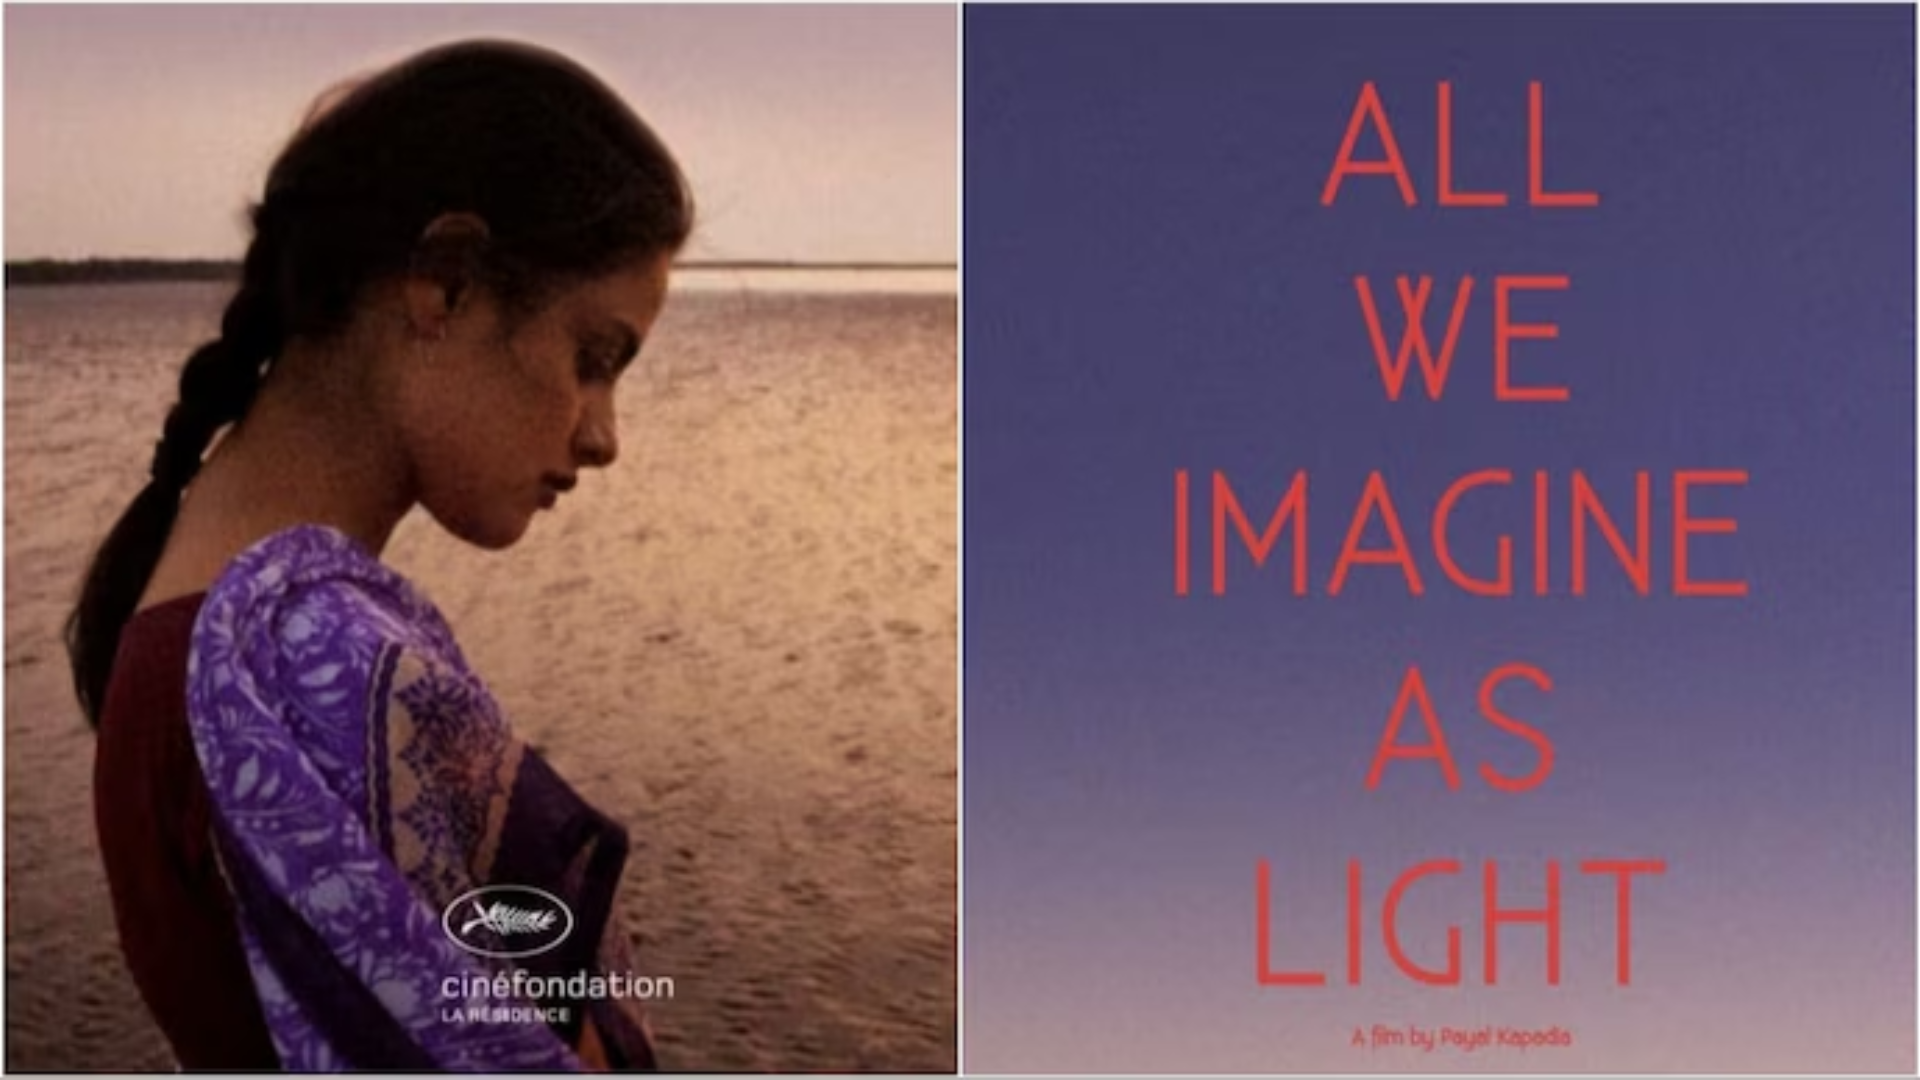 Indian Film ‘All We Imagine As Light’ Competing at Cannes Film Festival After 30 Years